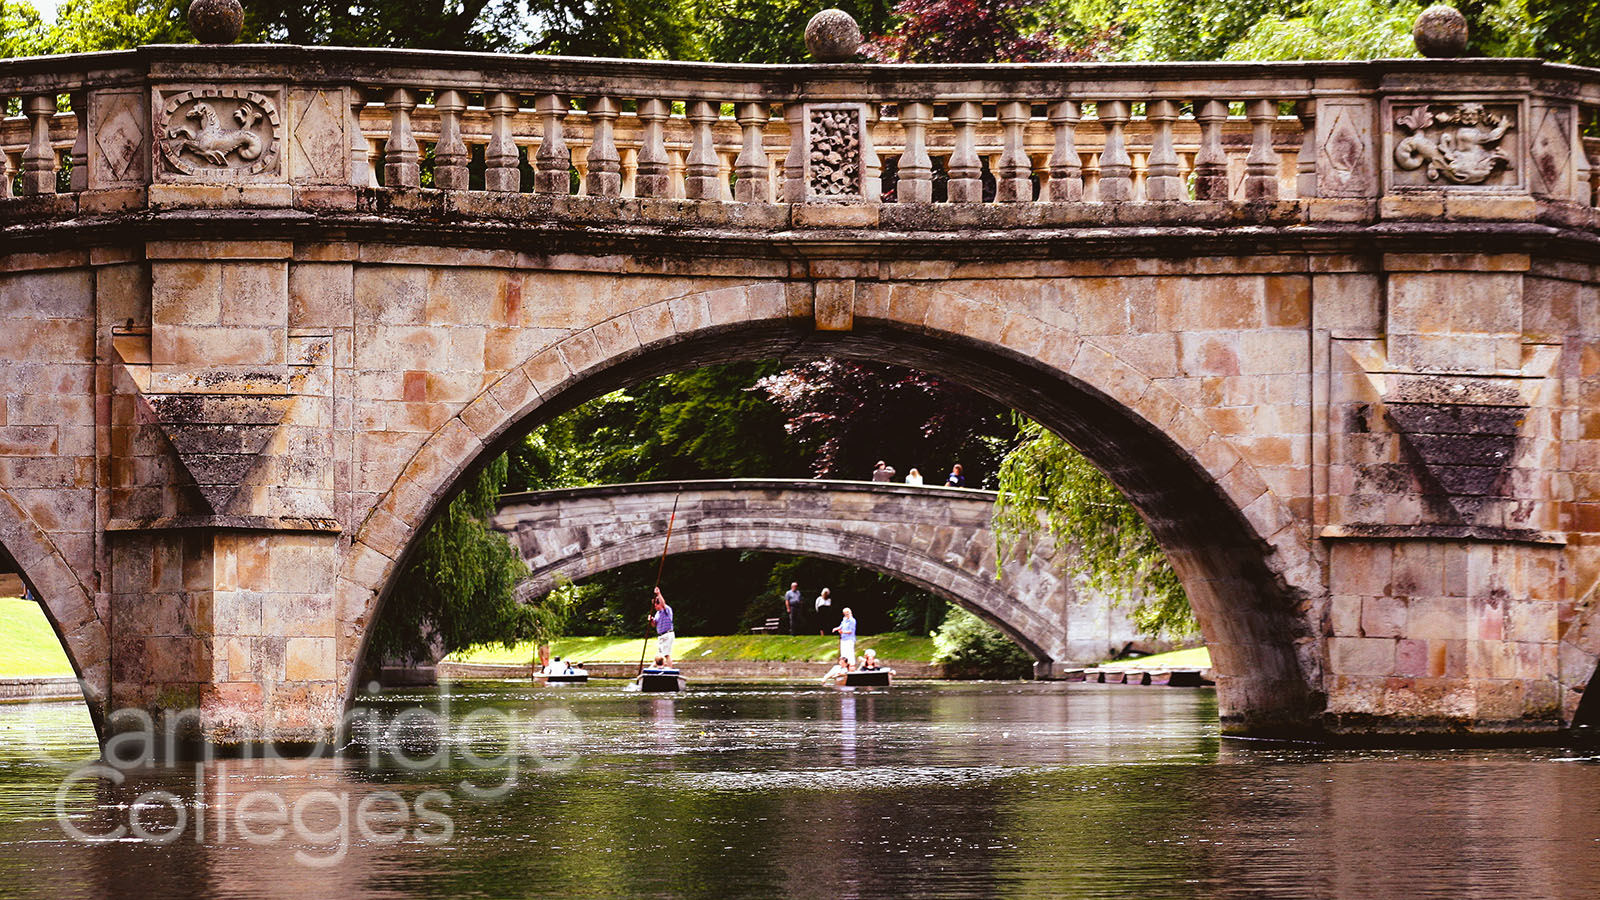 Clare Bridge on the river Cam, with King's bridge in the background